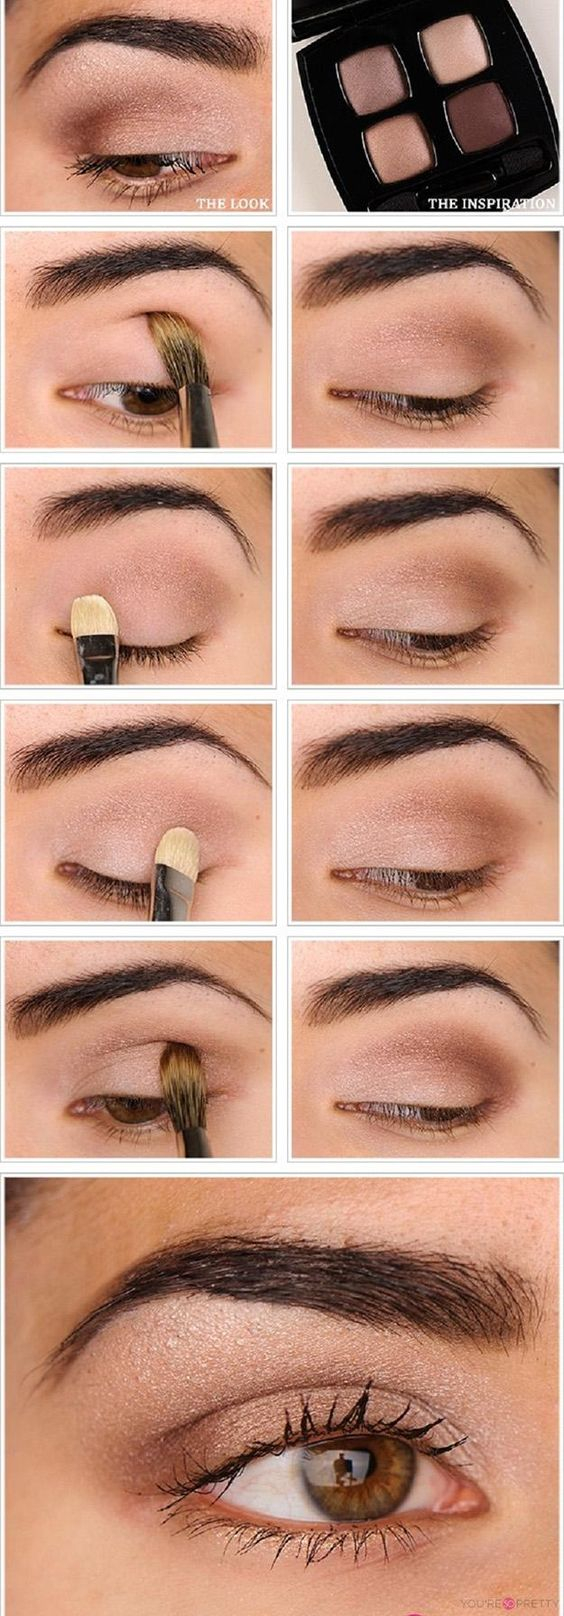 Natural Looking Eye Makeup 15 Eye Makeup Tutorials You Want To Try For Office Looks Pretty